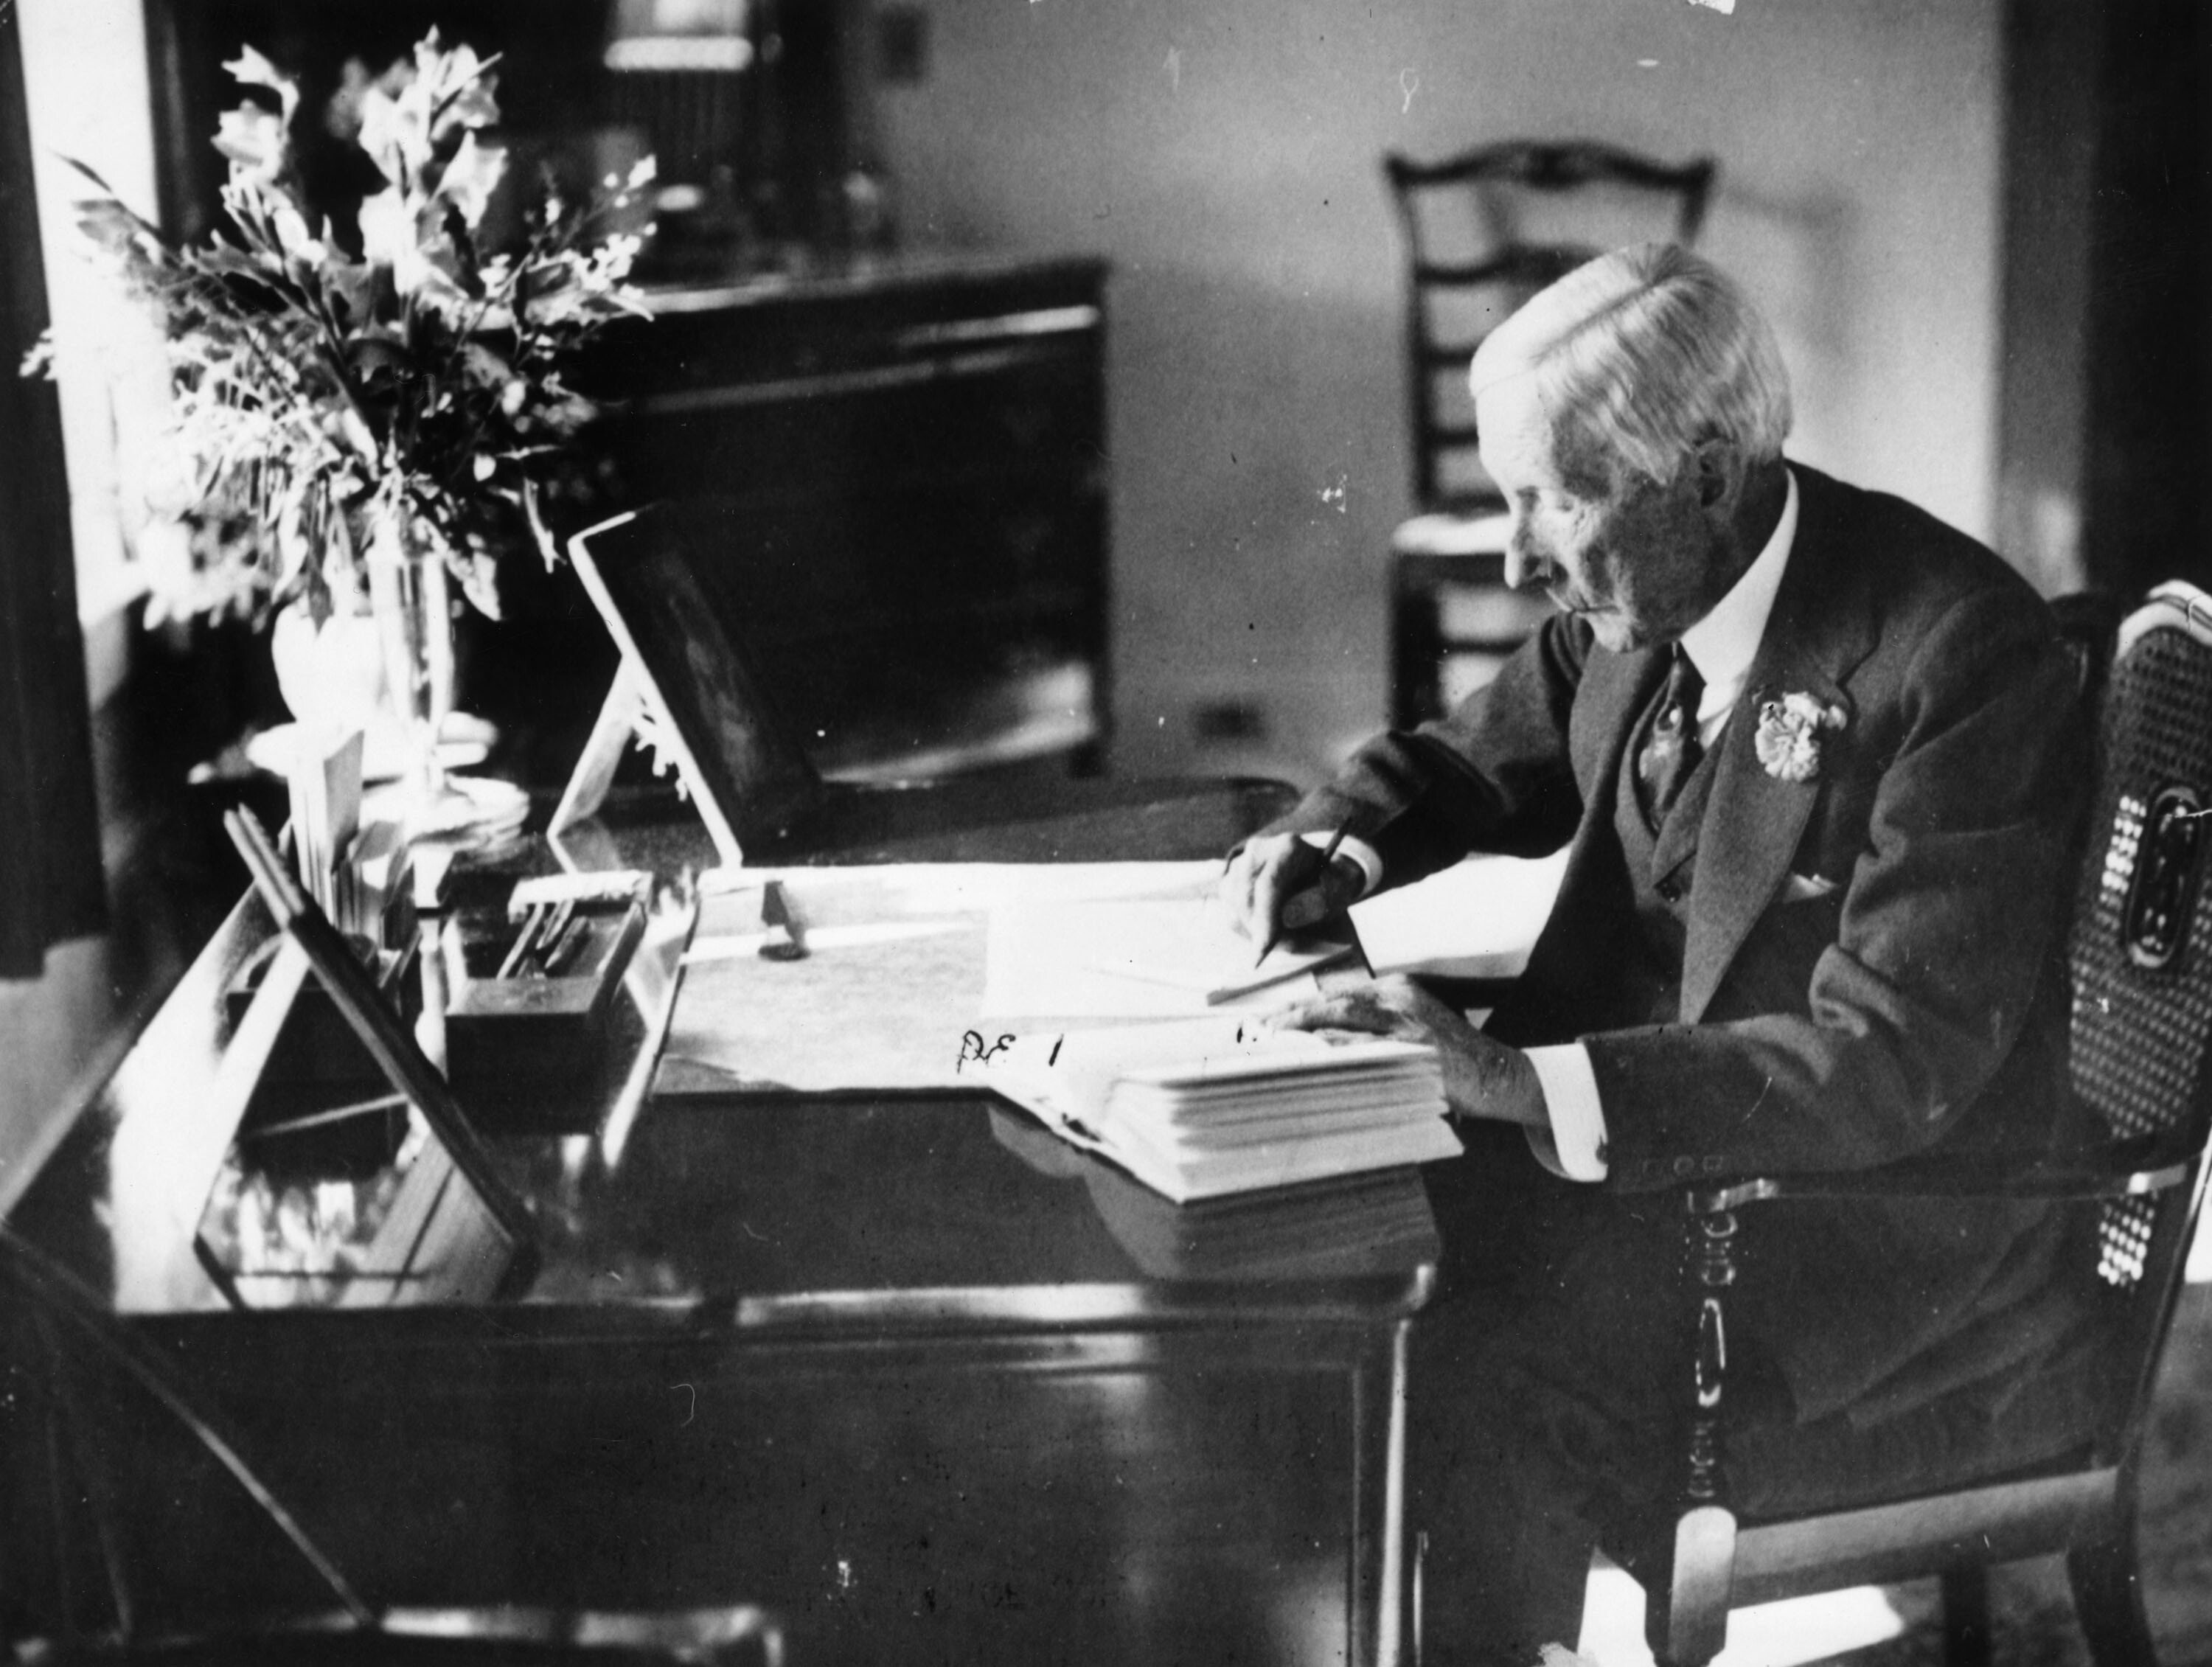 American oil magnate John D. Rockefeller works in his study. (Getty Images)